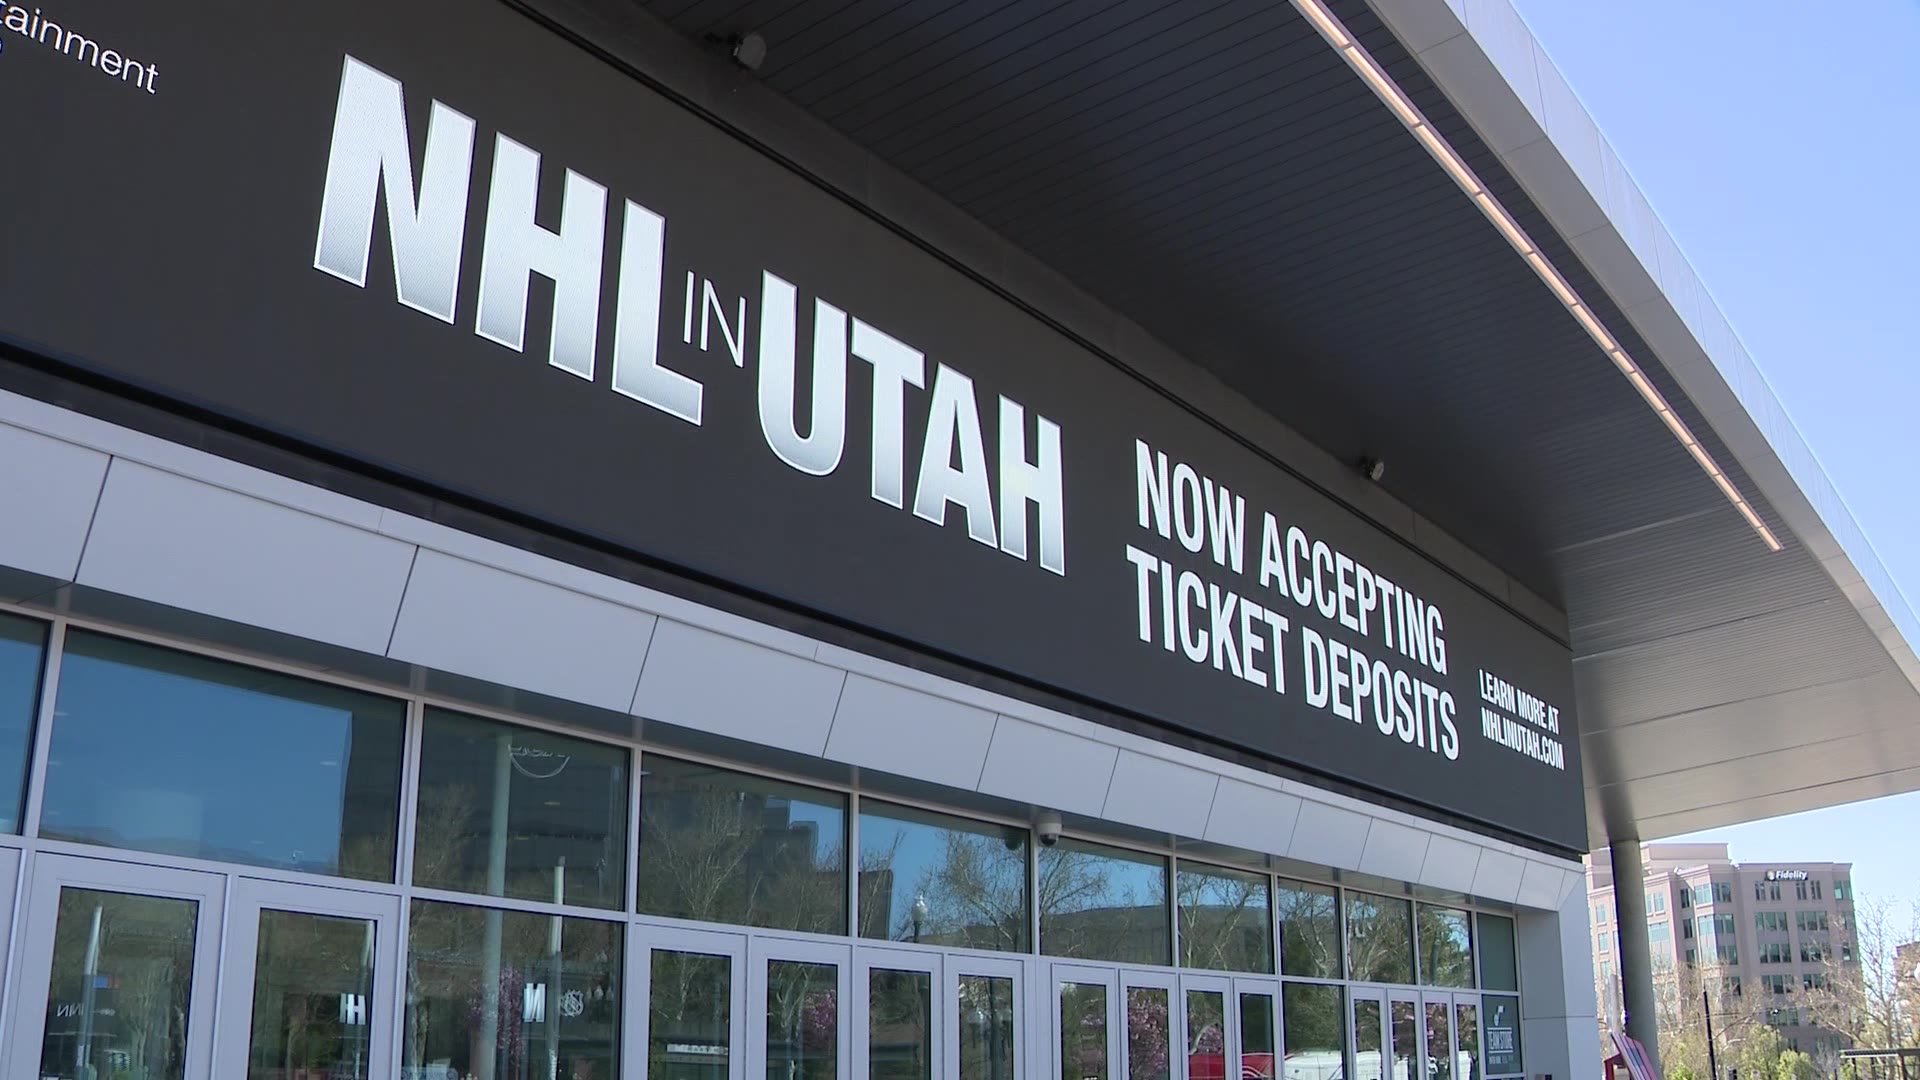 Signs on the Delta Center welcoming the NHL to Utah...